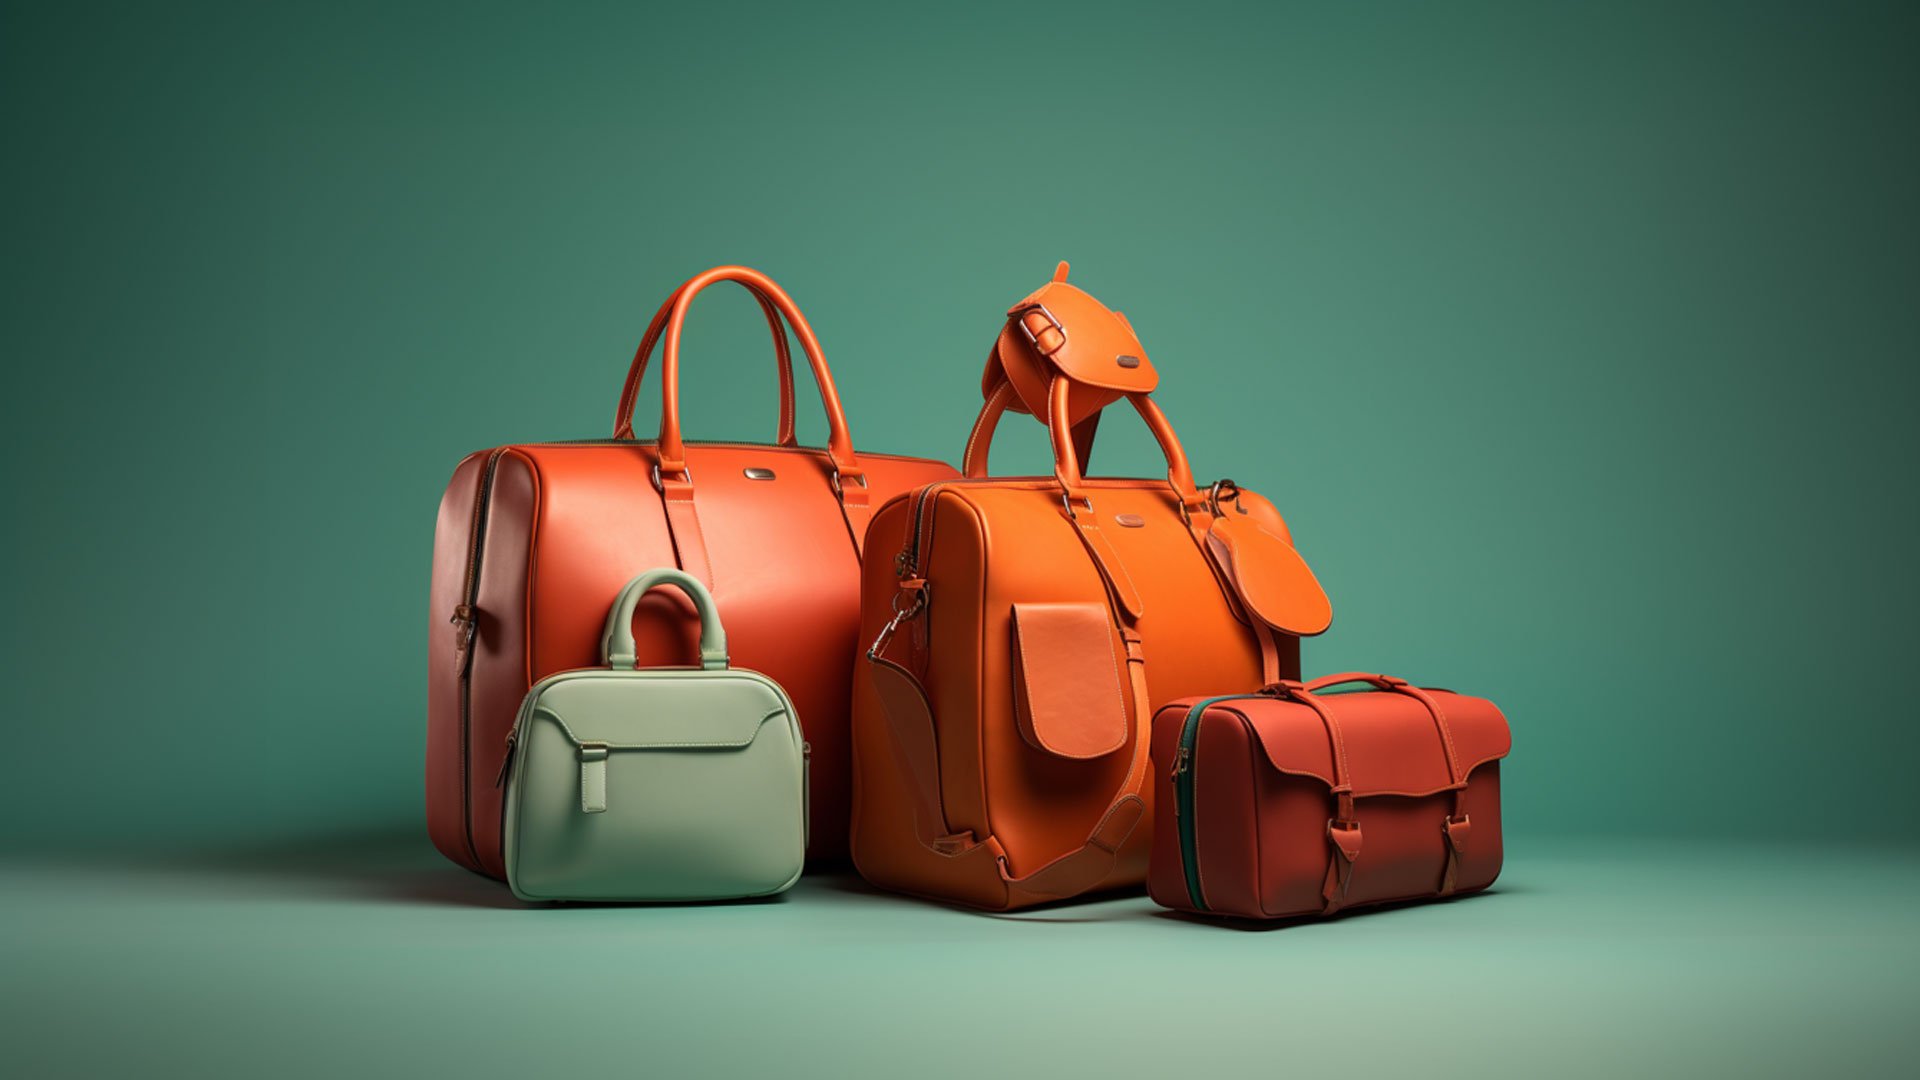 Collaborative Limited Edition Louis Vuitton Bags Lead the Way